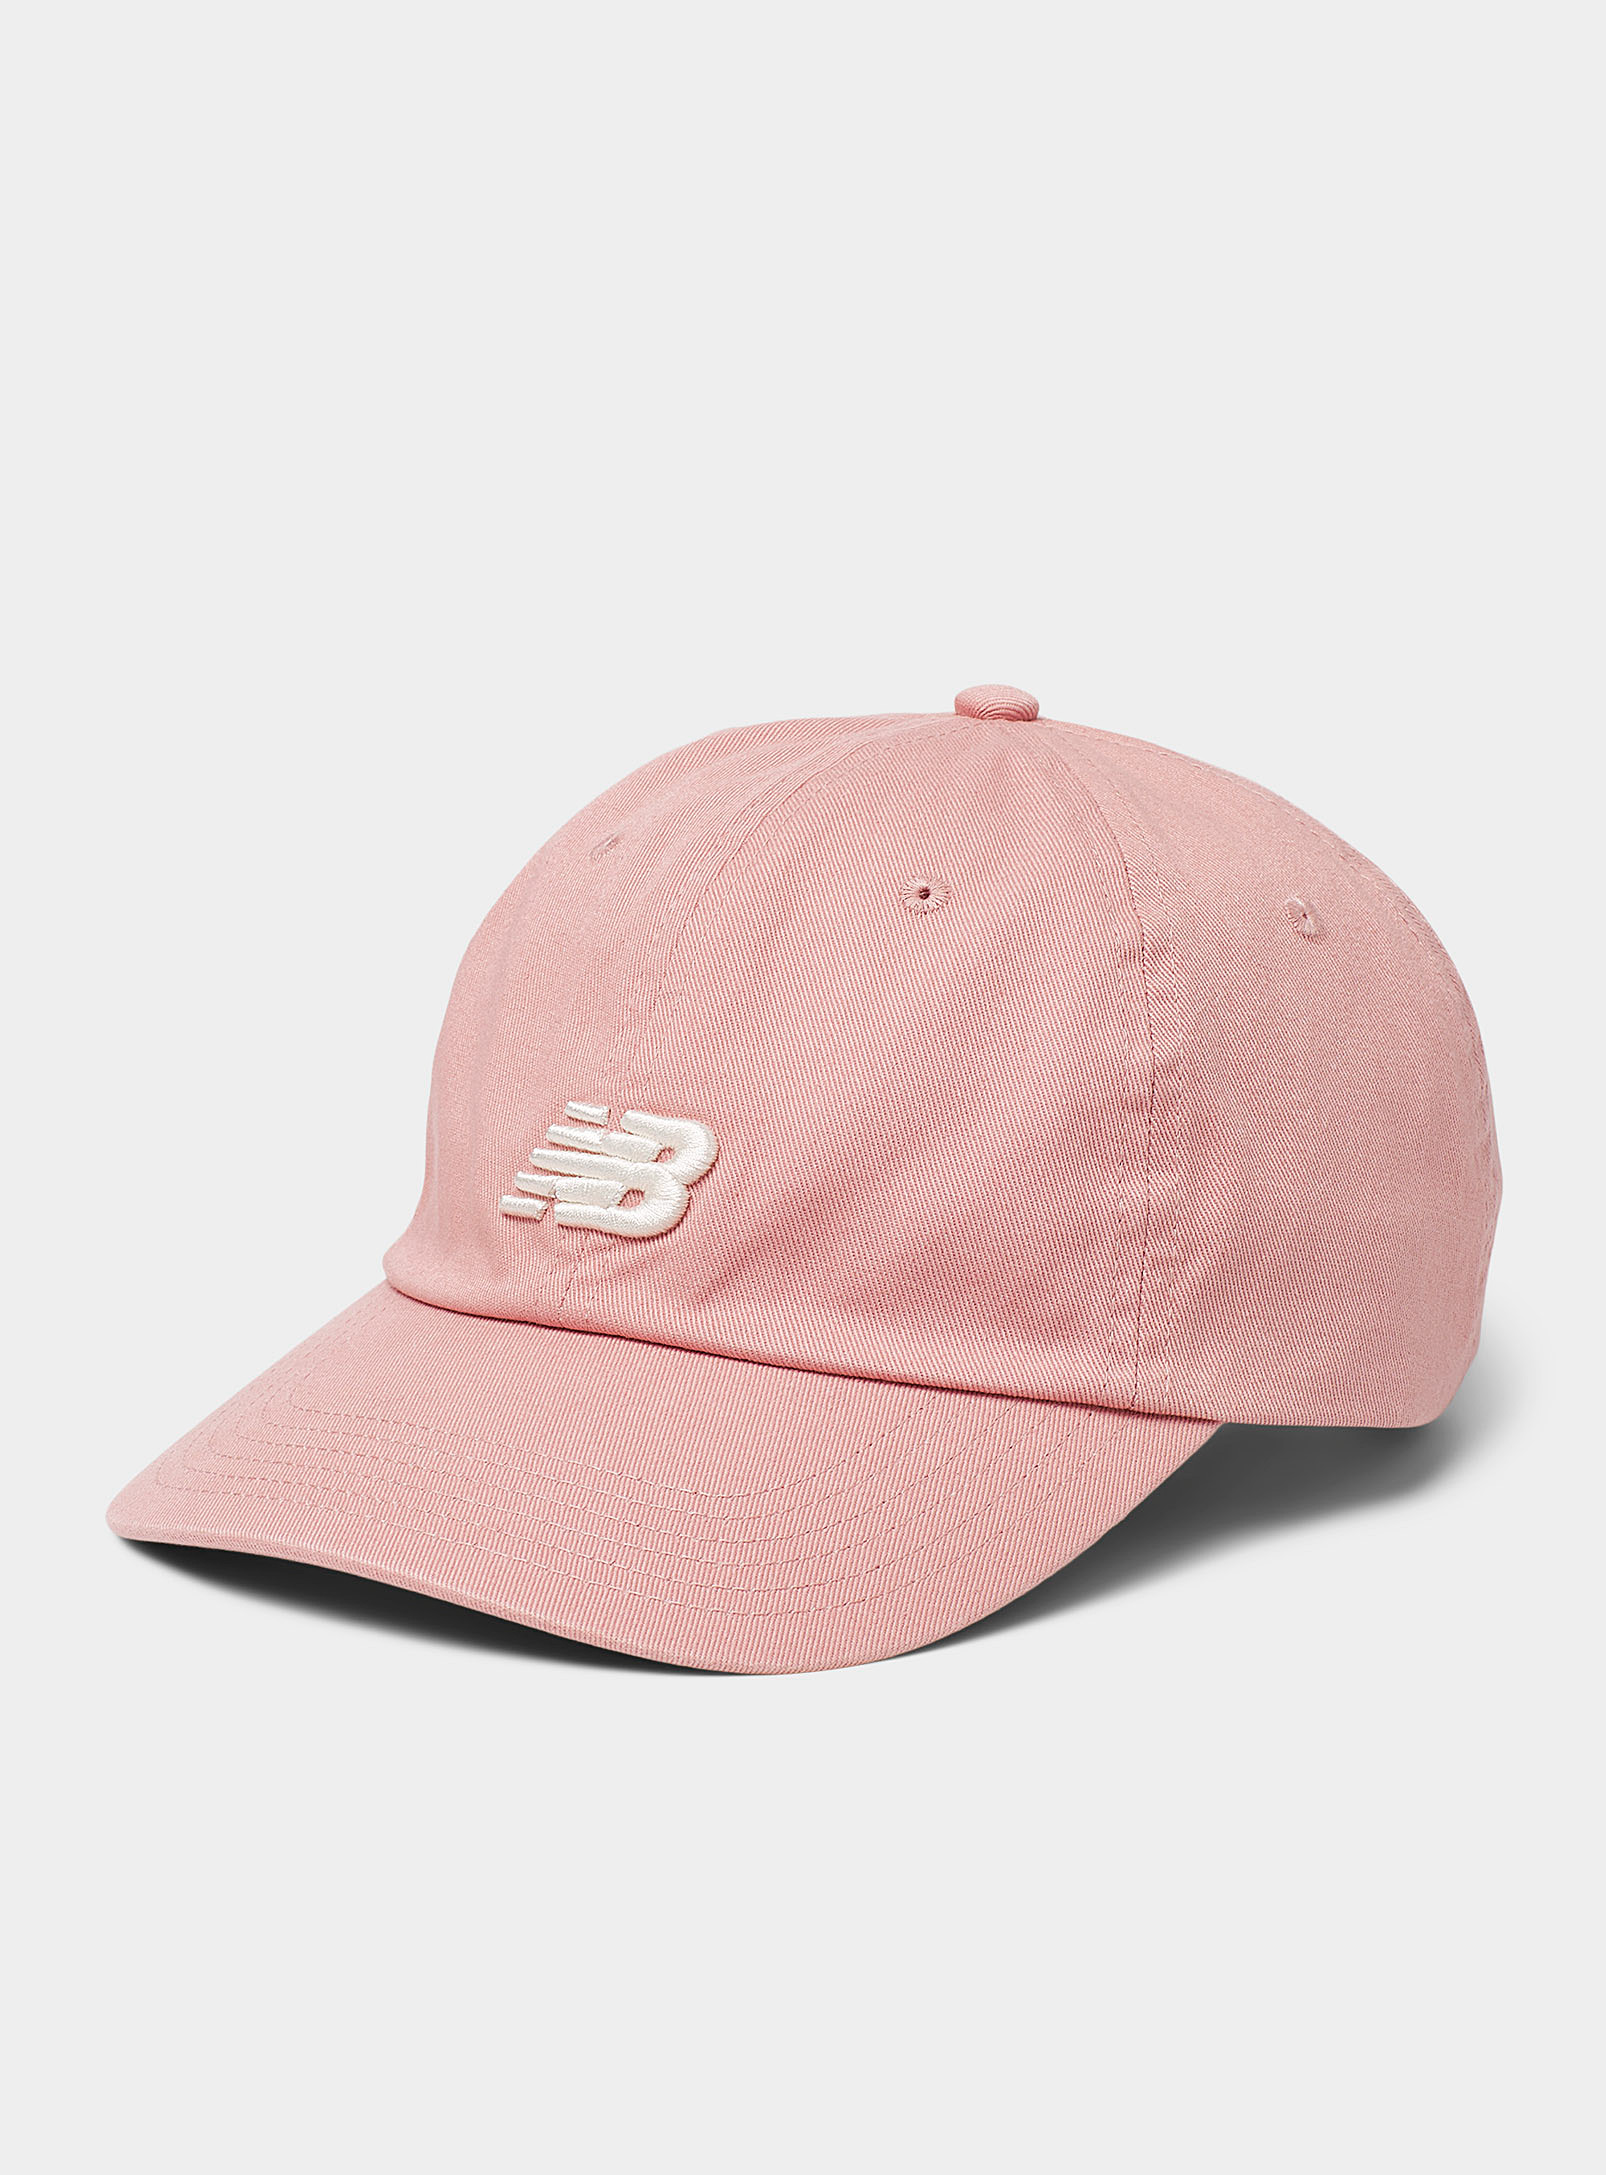 New Balance Embroidered Contrast Logo Baseball Cap In Pink